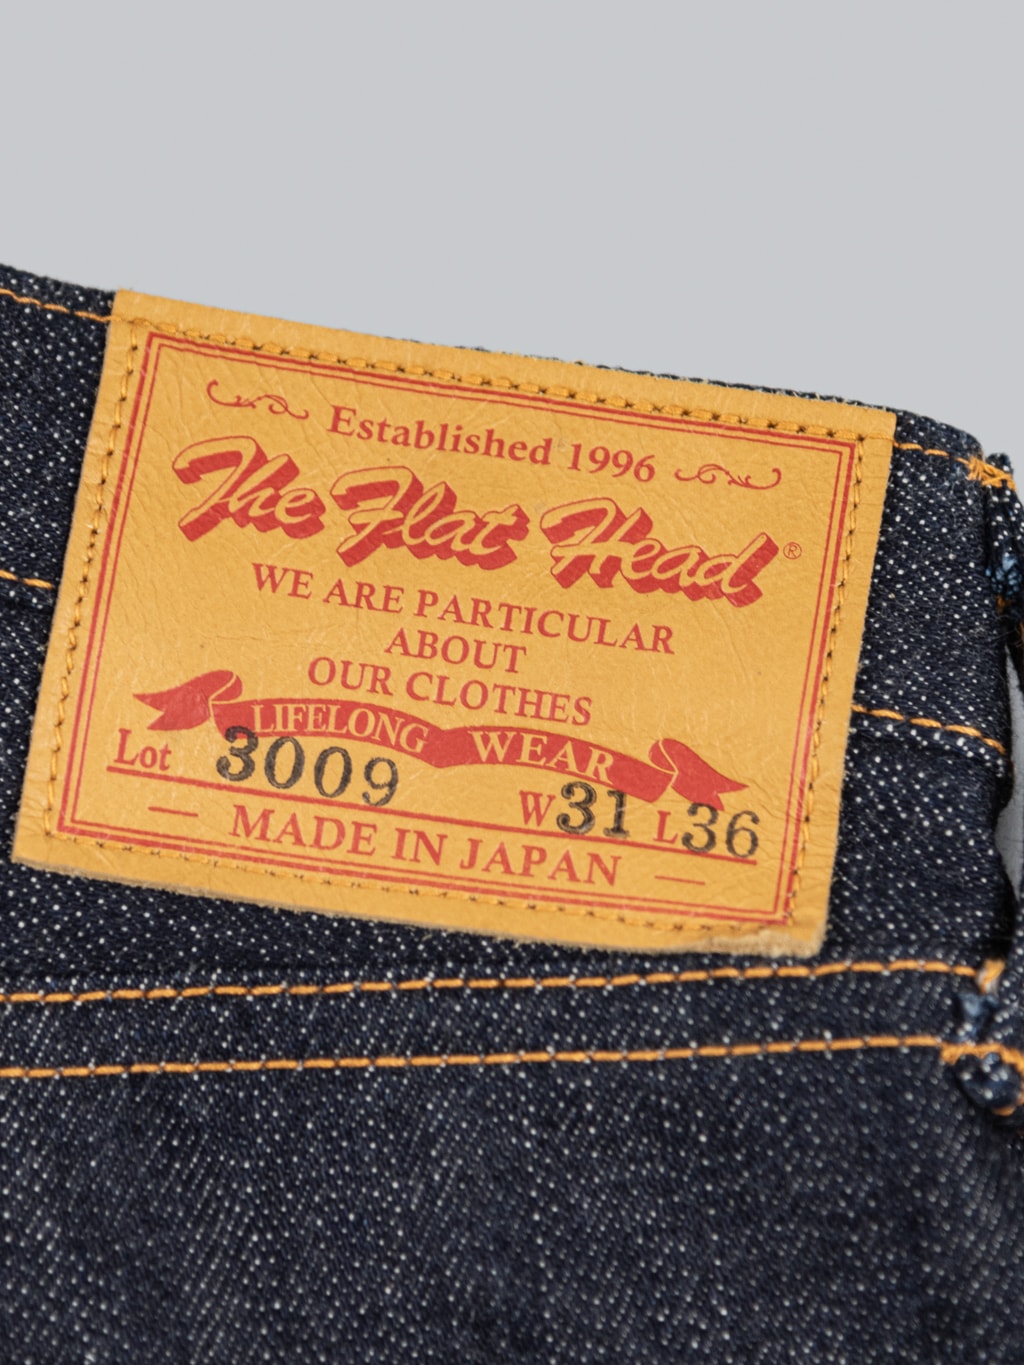 The Flat Head 3009 14.5oz straight tapered Jeans deerskin leather patch